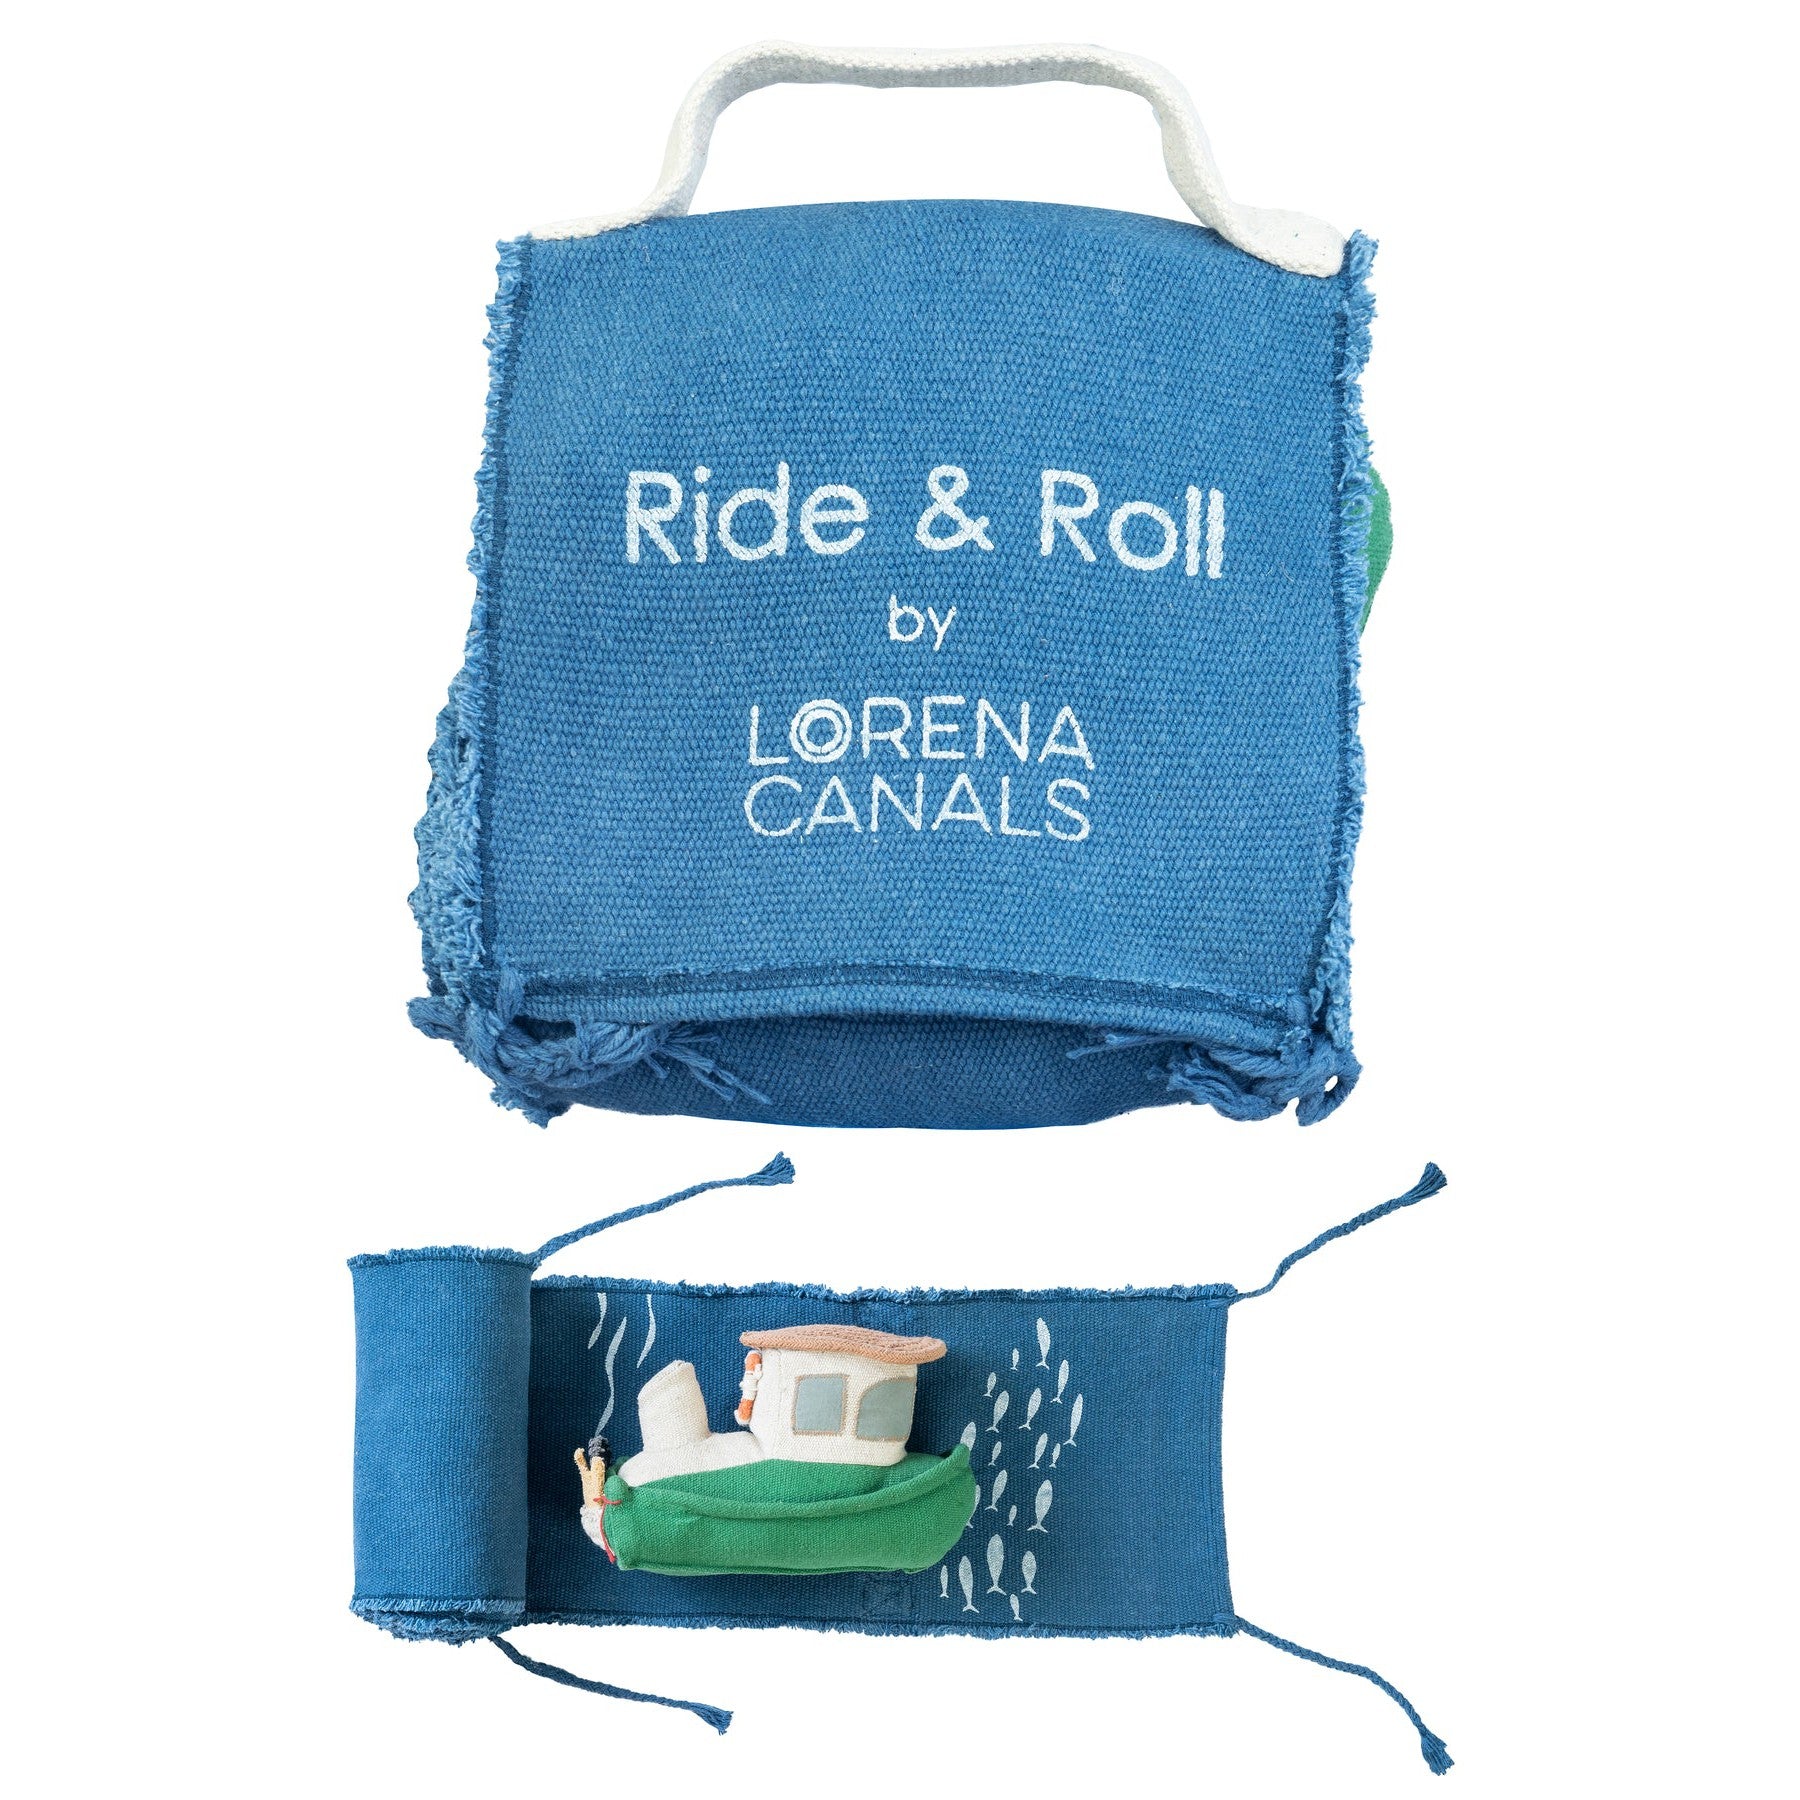 Lorena Canals Ride & Roll Sea Clean Up  Boat